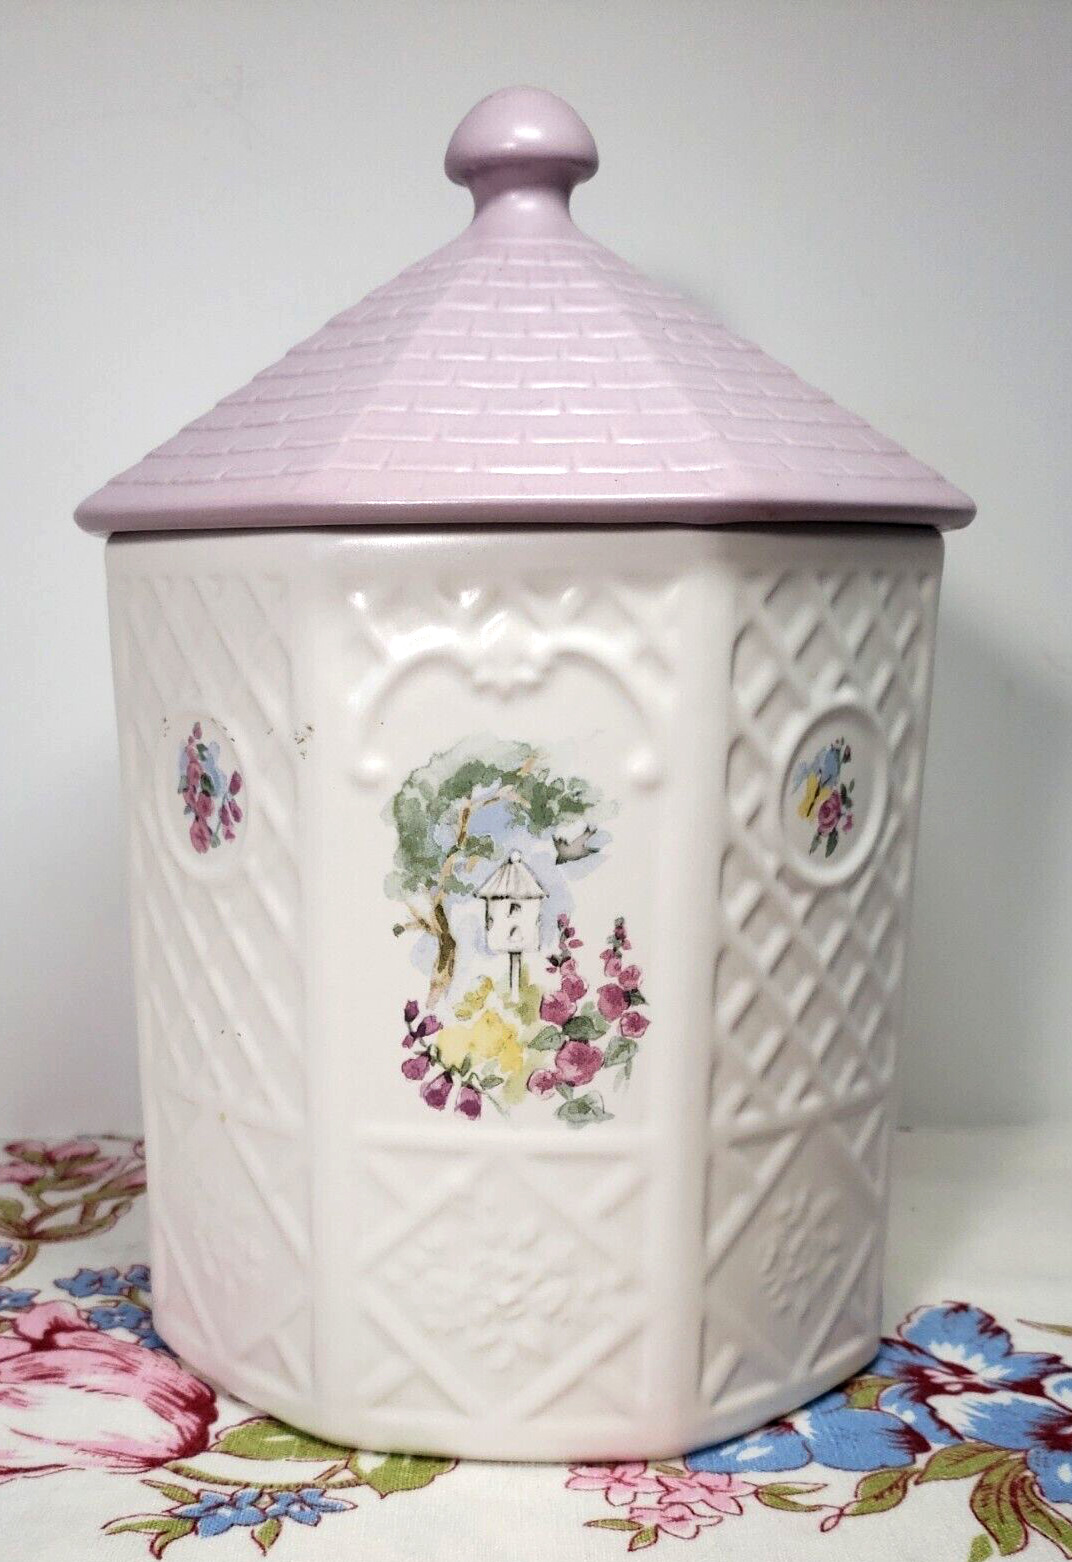 Pfaltzgraff Cape May Cookie Jar Gazebo Cottage Core Canister Sculpted Ceramic